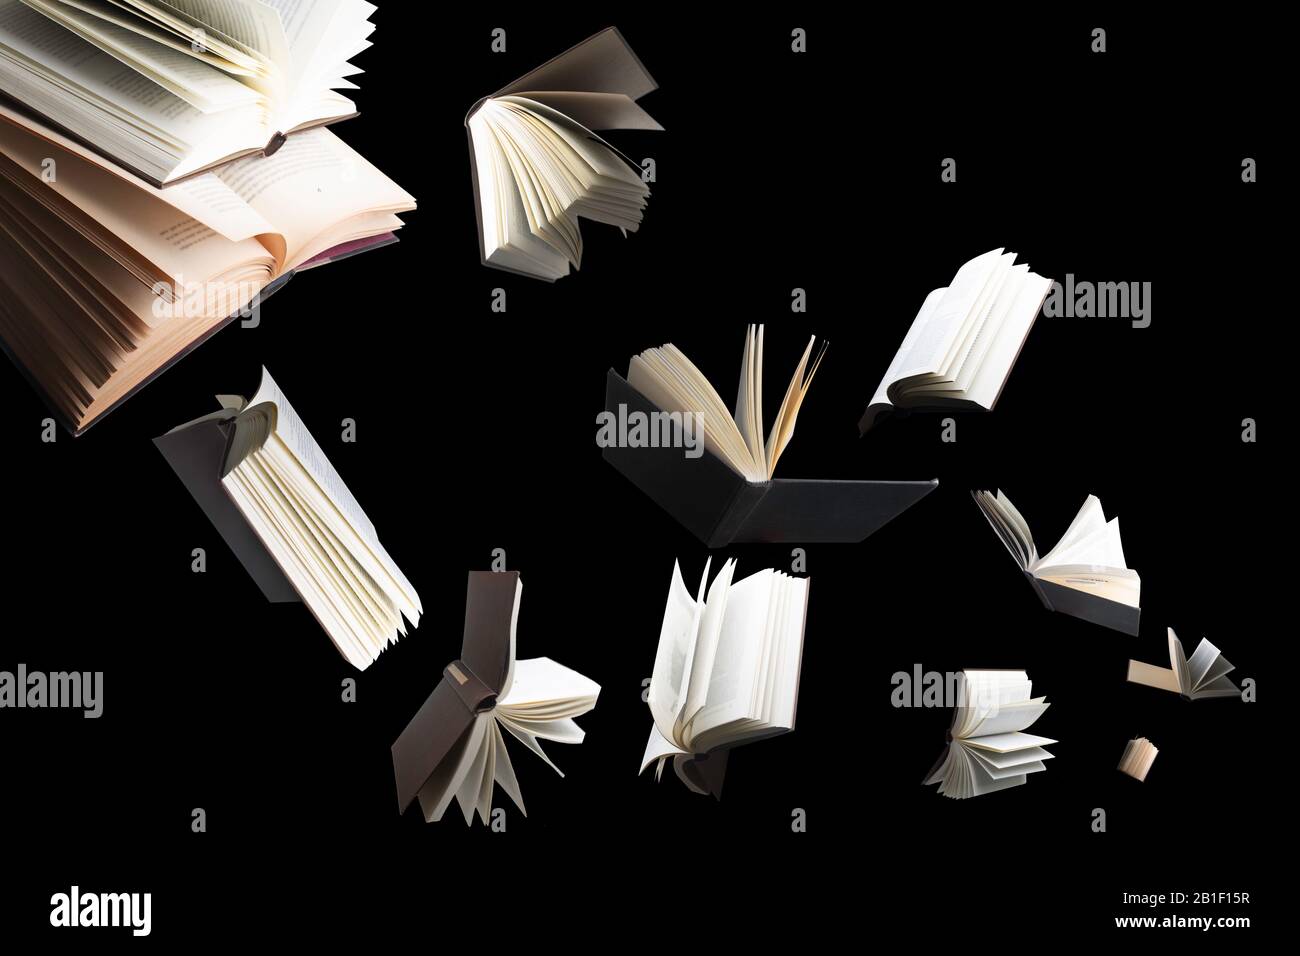 Flying several books isolated on black background. Stock Photo